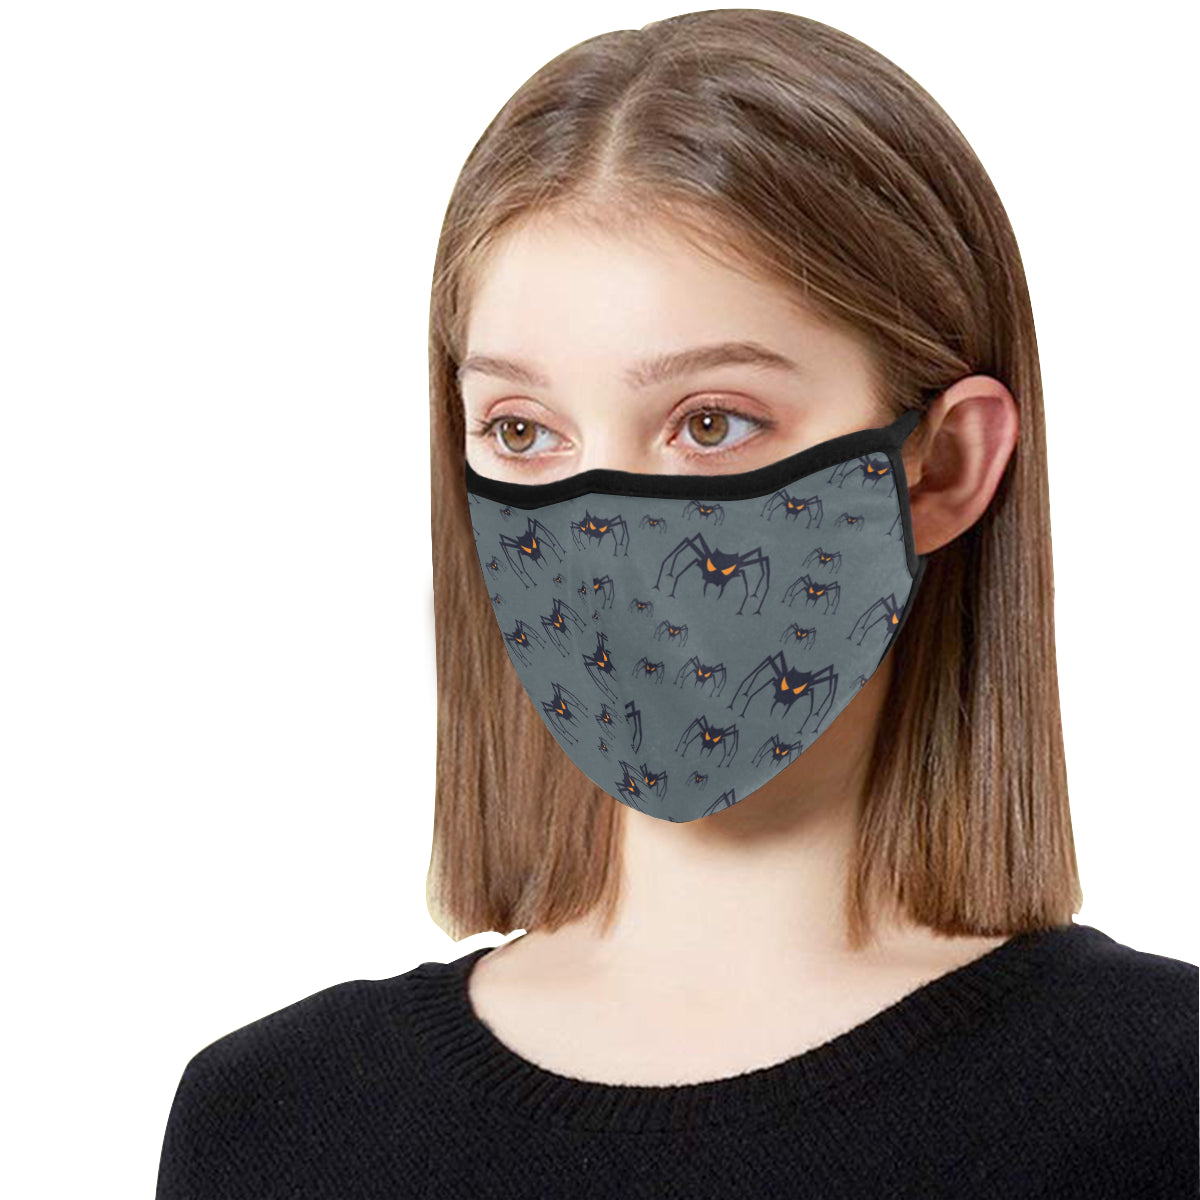 Crittersville Print FM Cotton Fabric Face Mask with filter slot (30 Filters Included) - Non-medical use